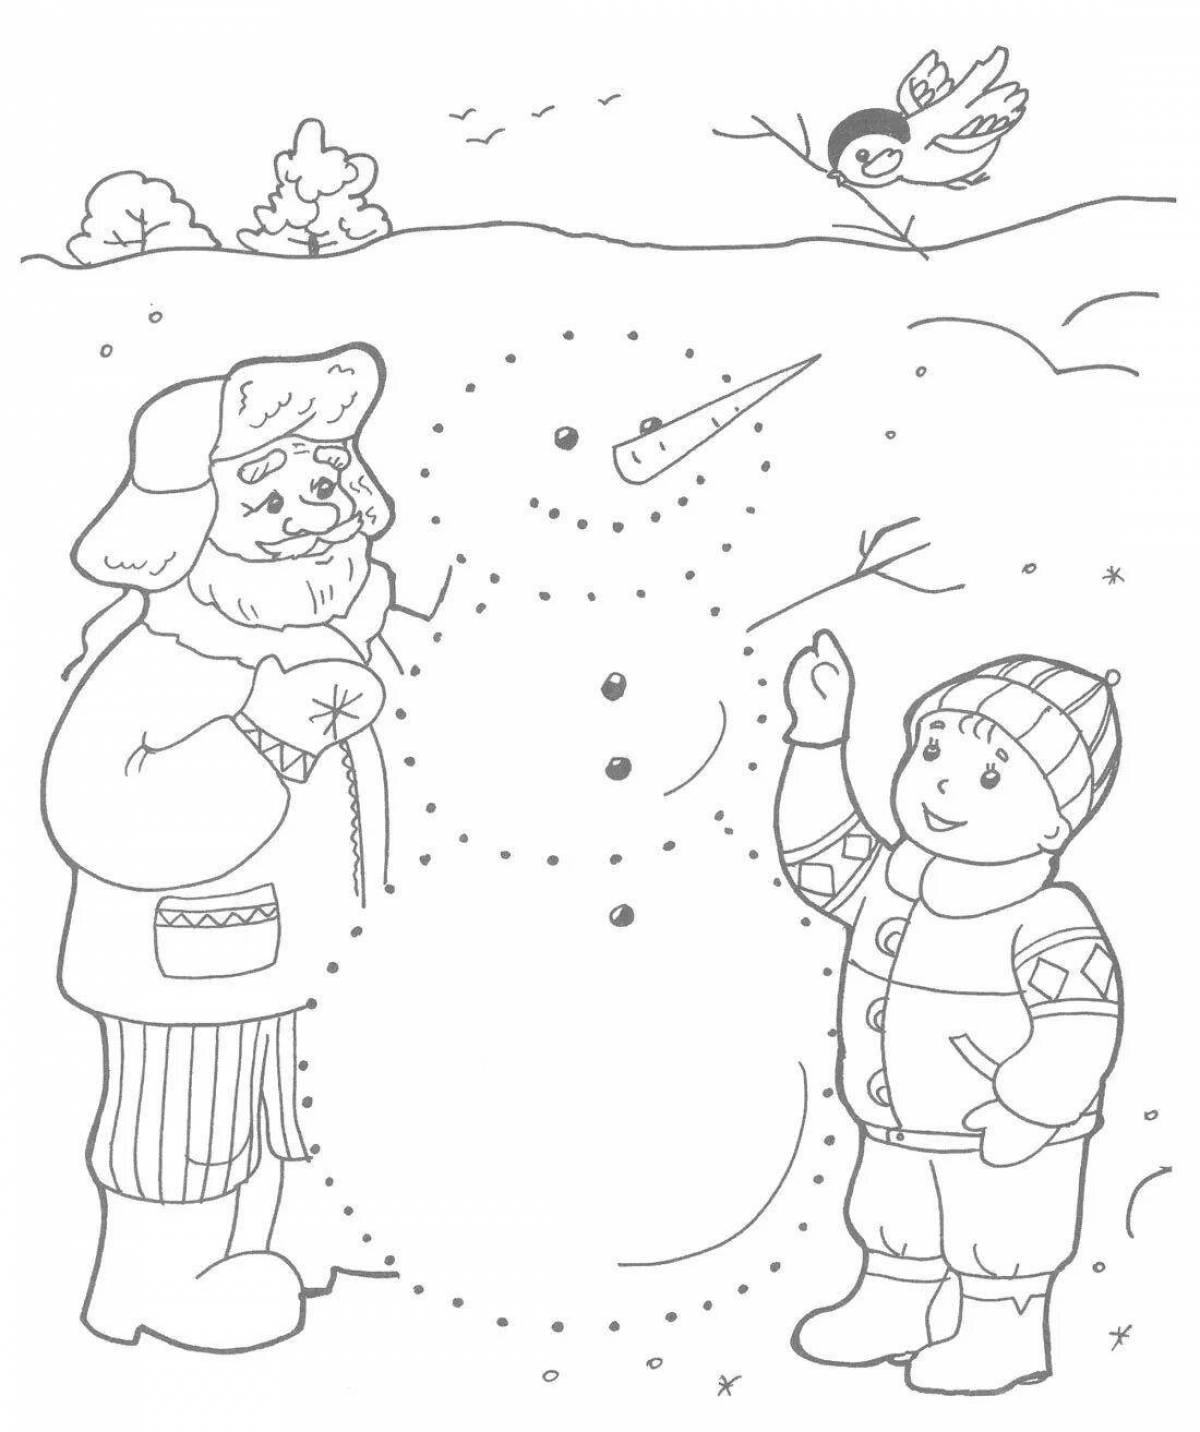 Charming winter coloring book for juniors